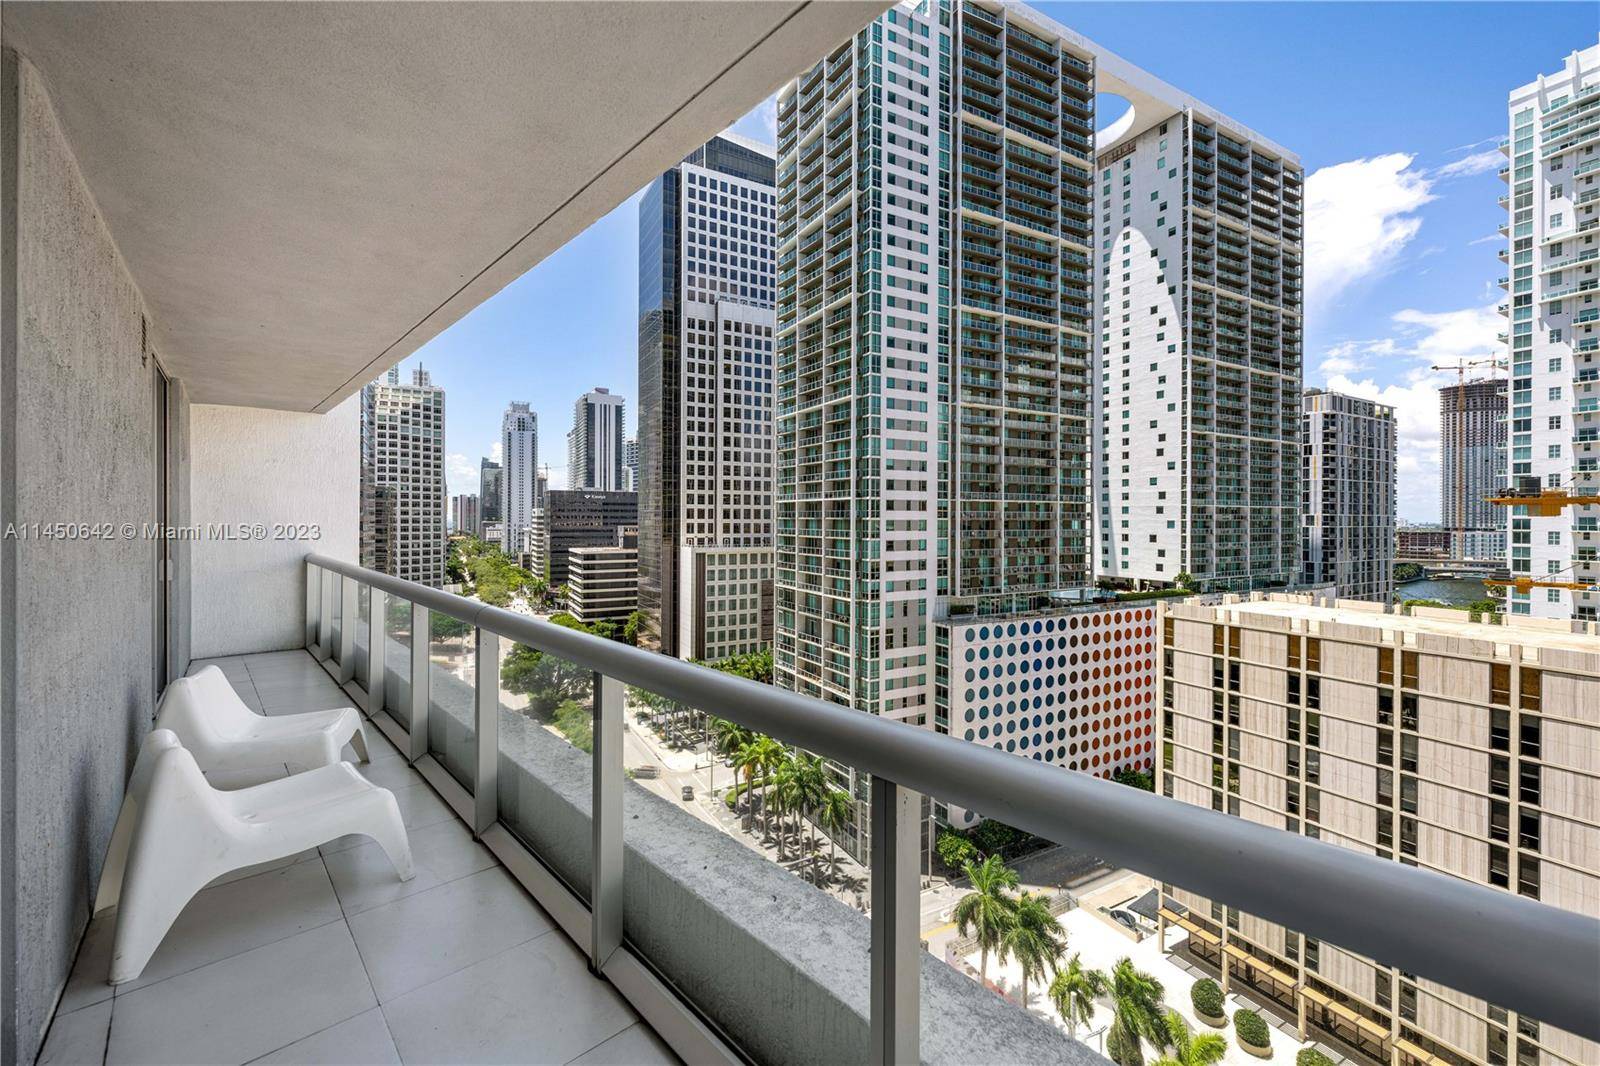 Welcome to the epitome of luxury and comfort at 485 Brickell Ave, Apartment 1604.